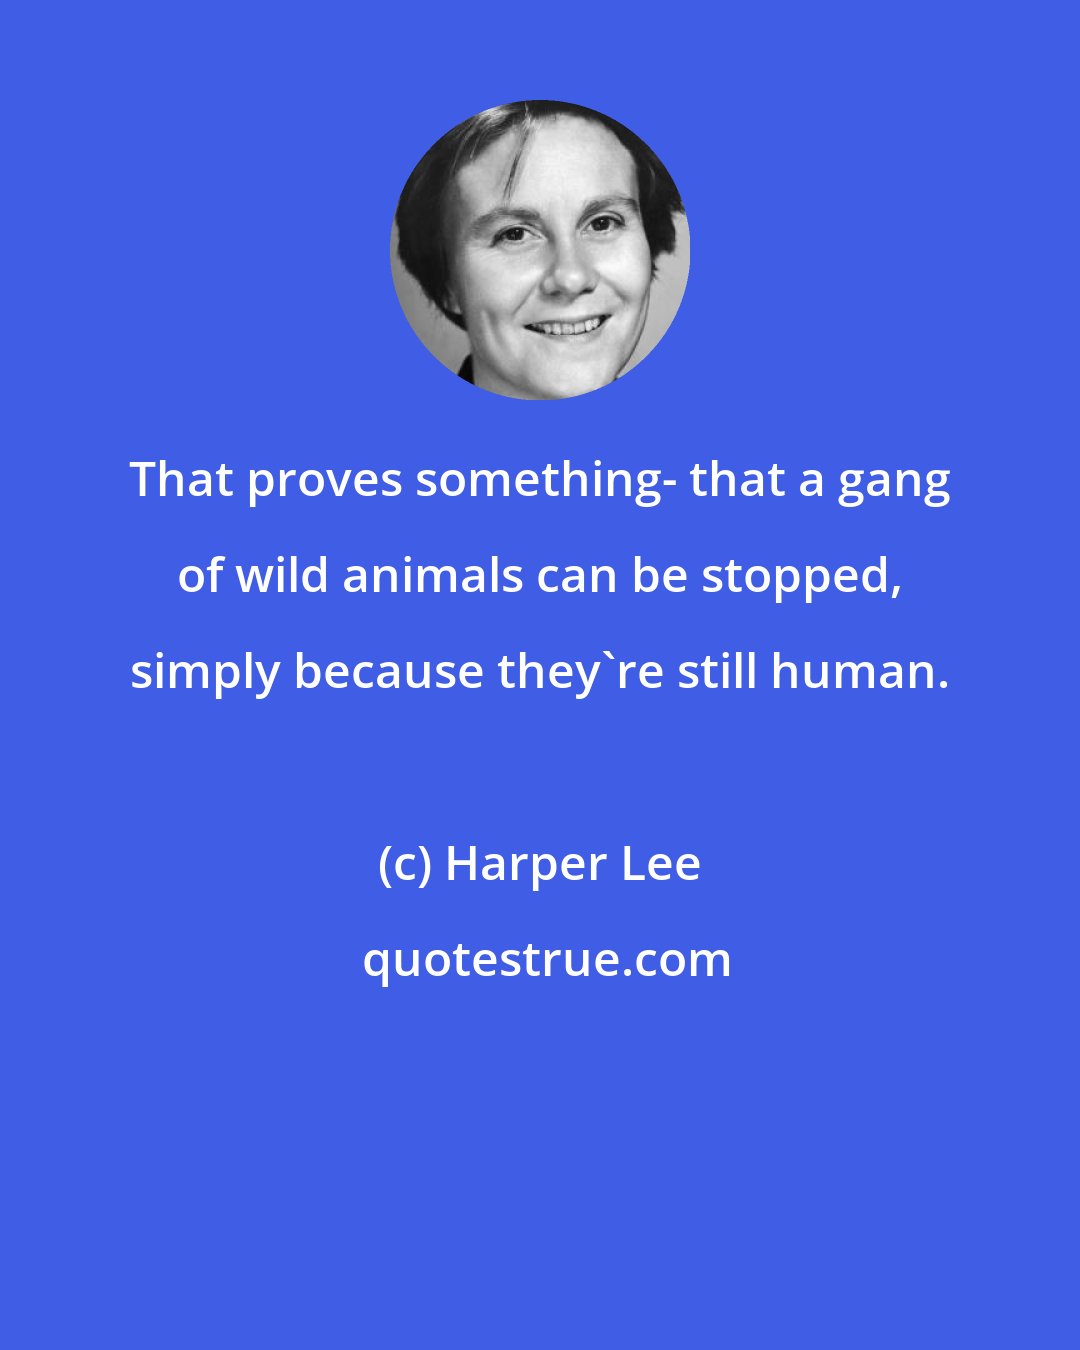 Harper Lee: That proves something- that a gang of wild animals can be stopped, simply because they're still human.